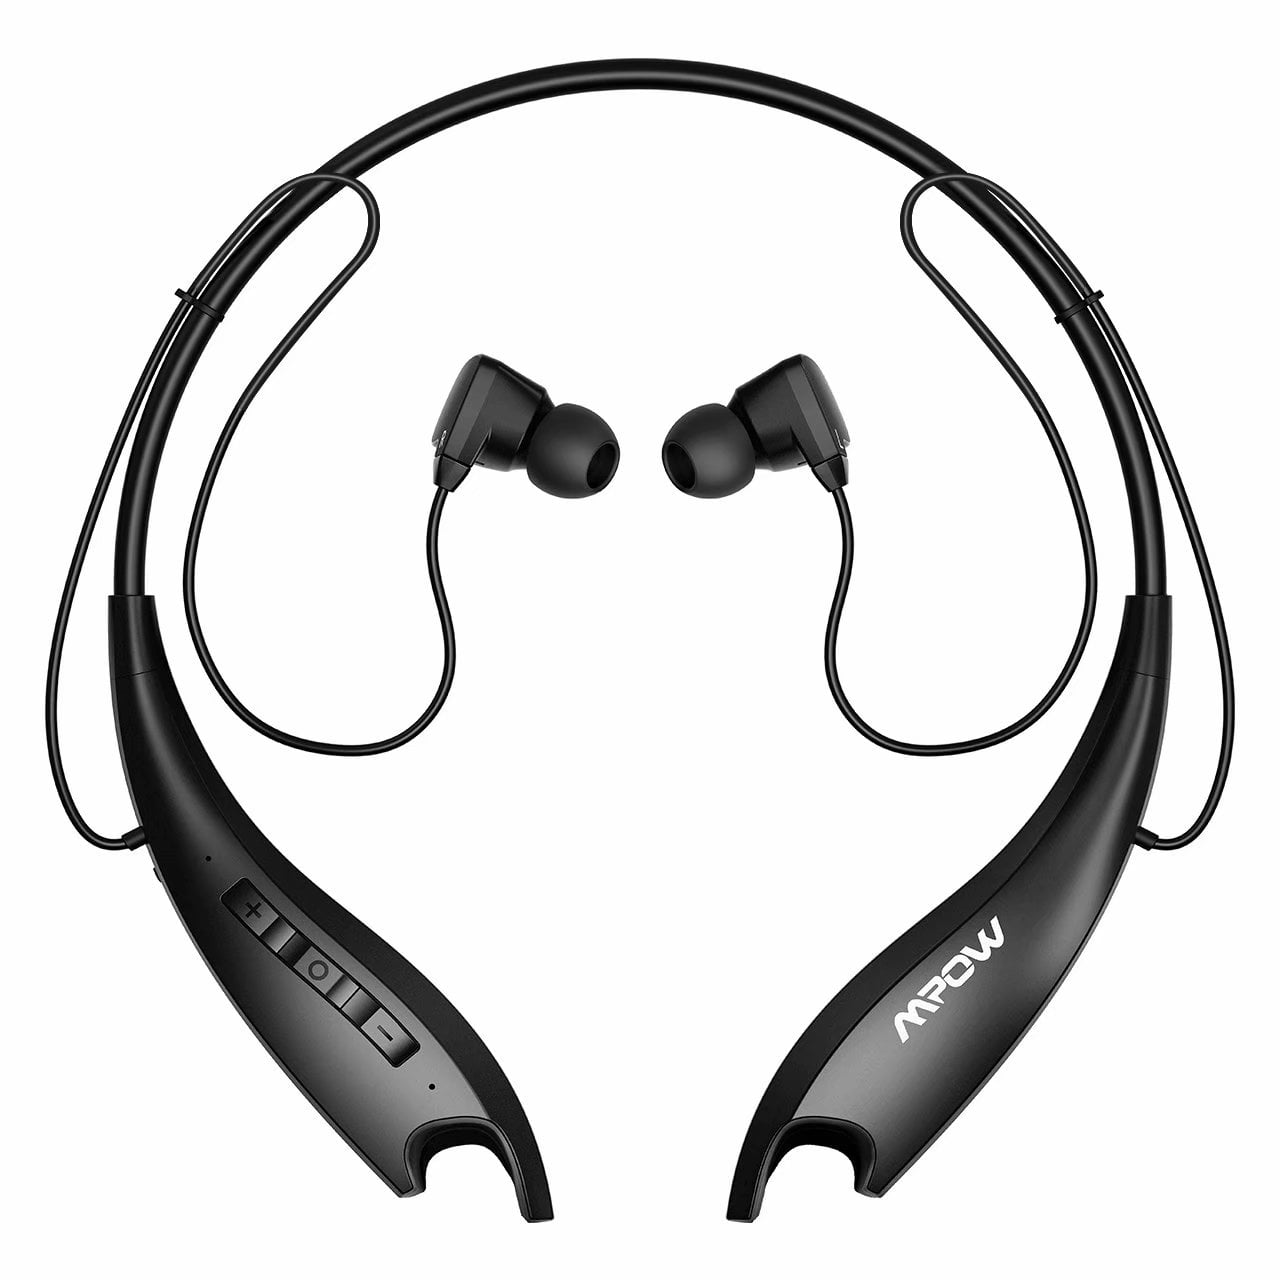 Jaws Gen-5 Bluetooth Headphones 18 Hrs Playtime, V5.0 Bluetooth Neckband Headset w/Call Vibrate & CVC 6.0 Noise Cancelling Mic, Wireless Headphones for Cell Phones/Tablets/Computers Black - image 1 of 8